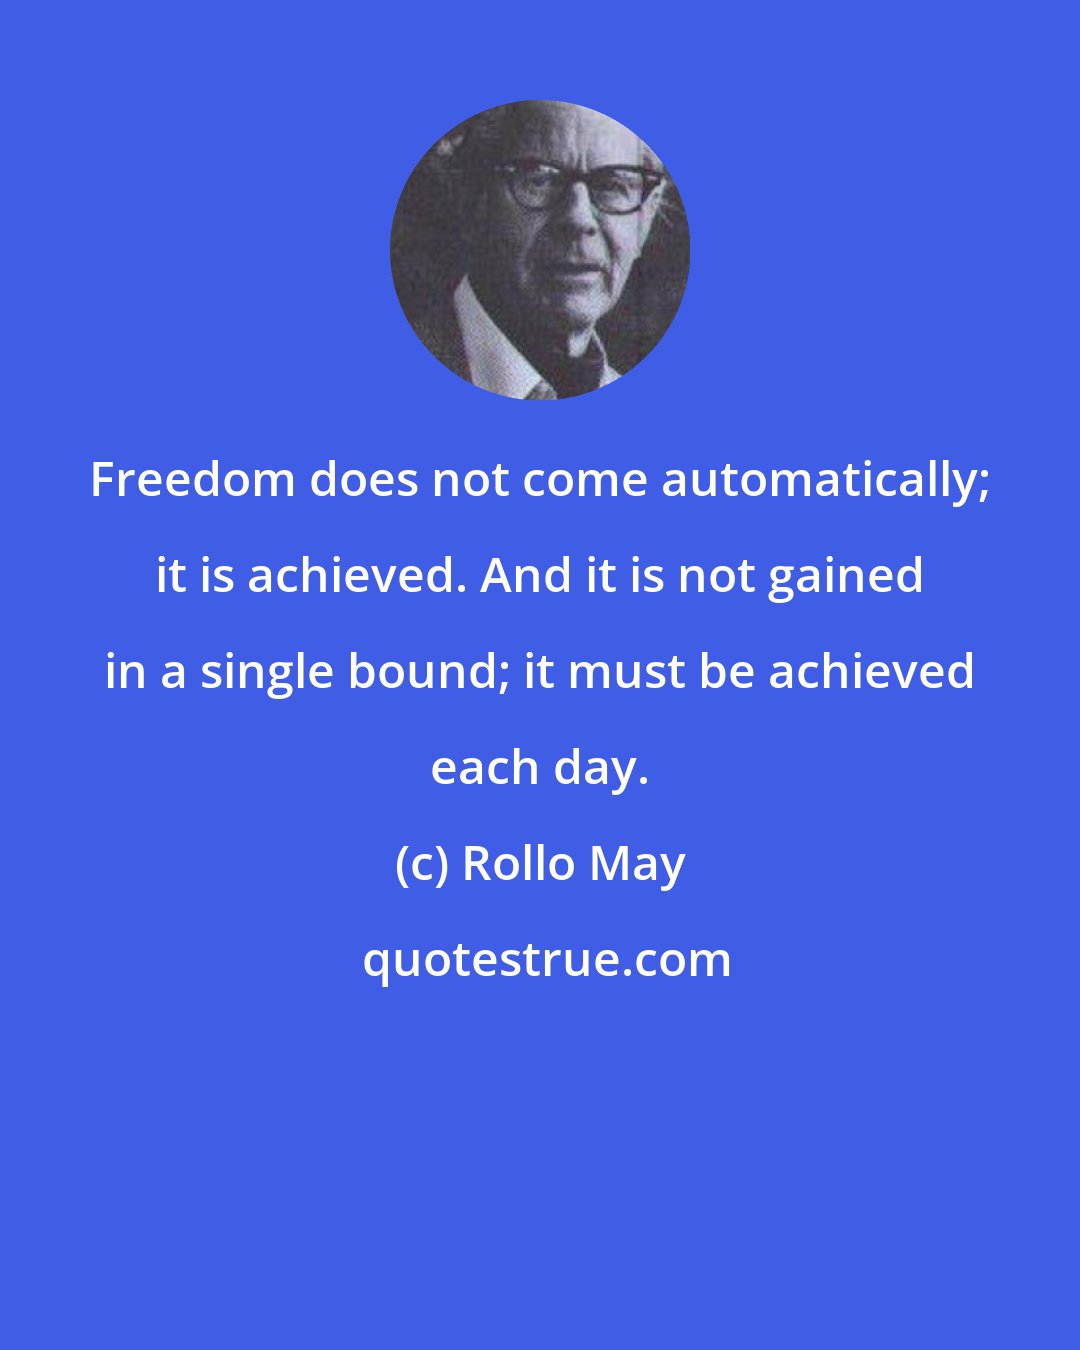 Rollo May: Freedom does not come automatically; it is achieved. And it is not gained in a single bound; it must be achieved each day.